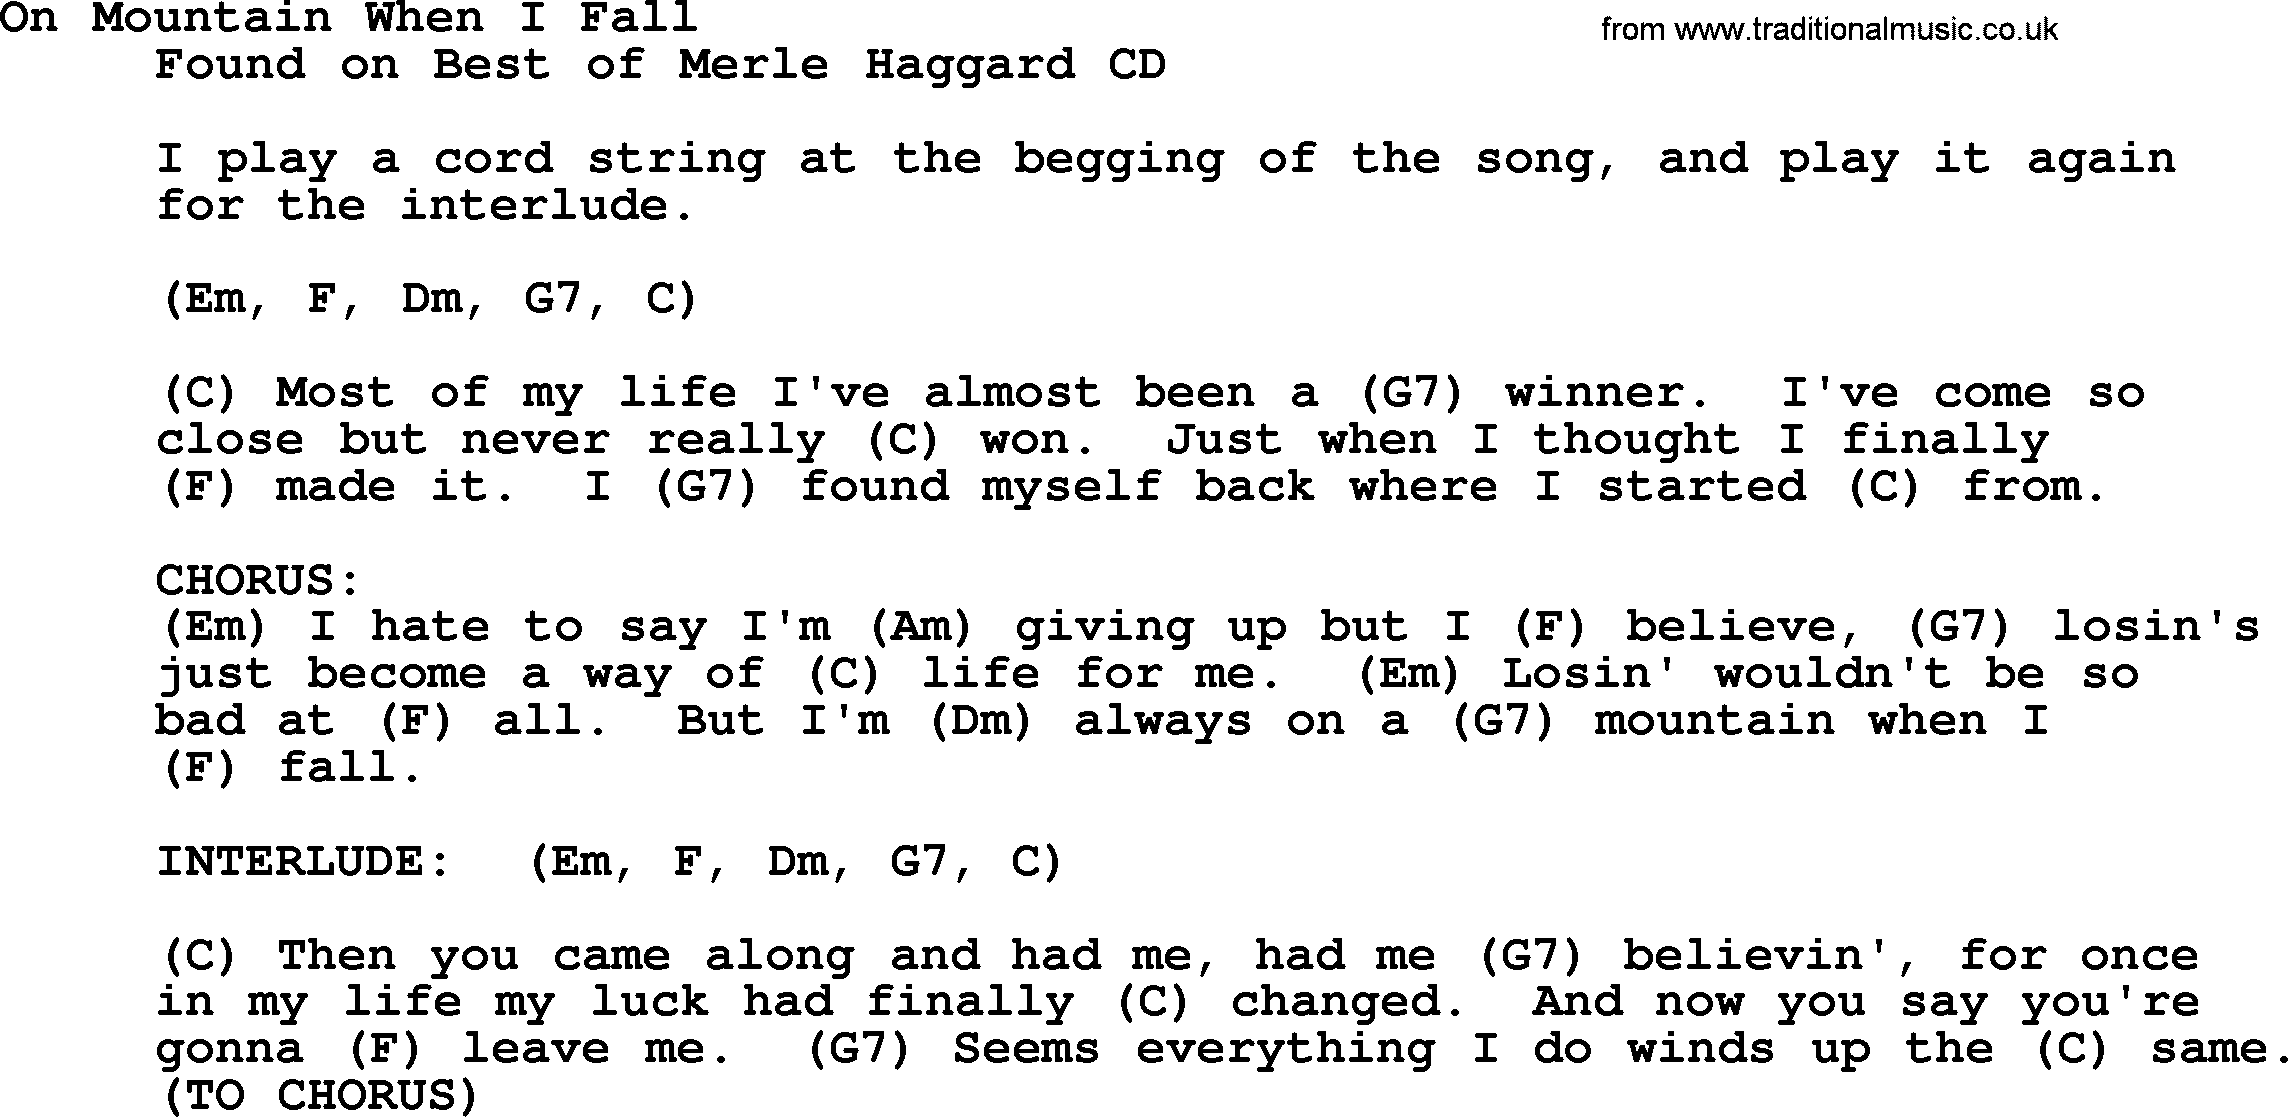 Merle Haggard song: On Mountain When I Fall, lyrics and chords